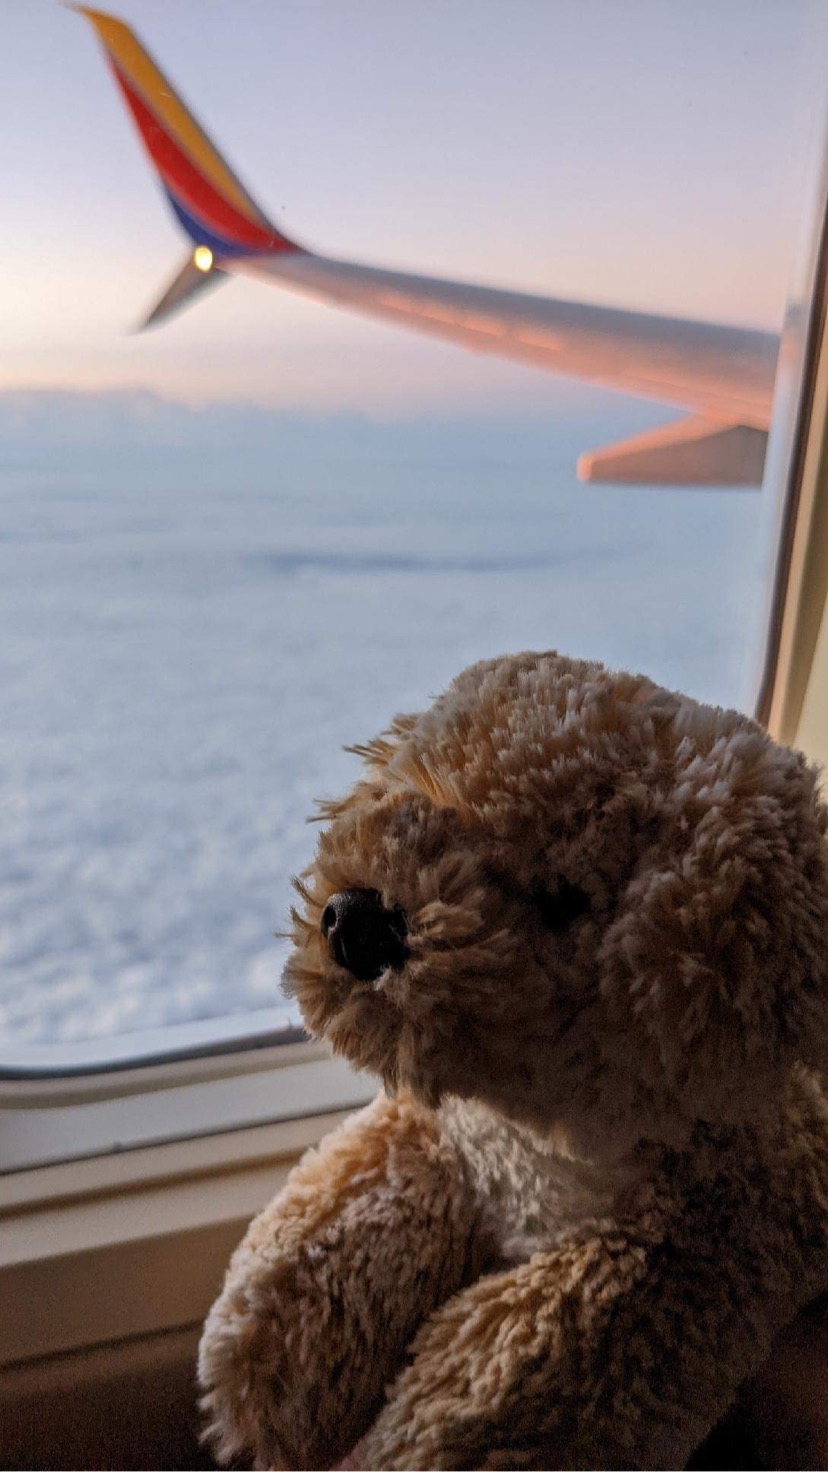 Dog Dog the stuffed animal on a Southwest air flight. He's gazing out of the window and at the clouds below.